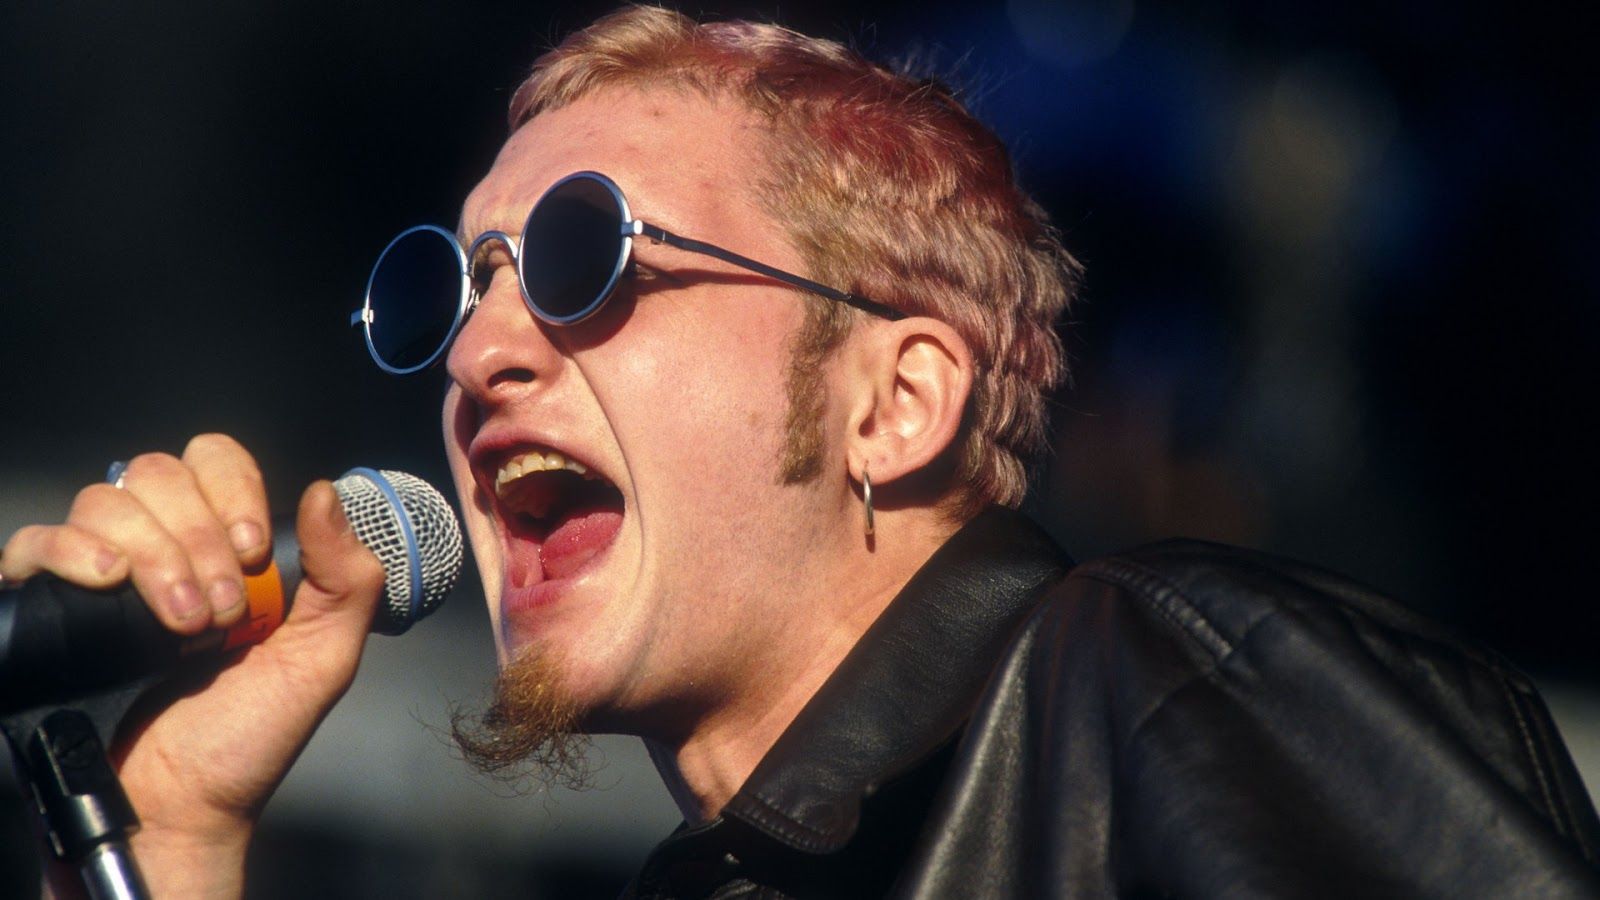 Seattle creates “Layne Staley day” in tribute to Alice In Chains vocalist